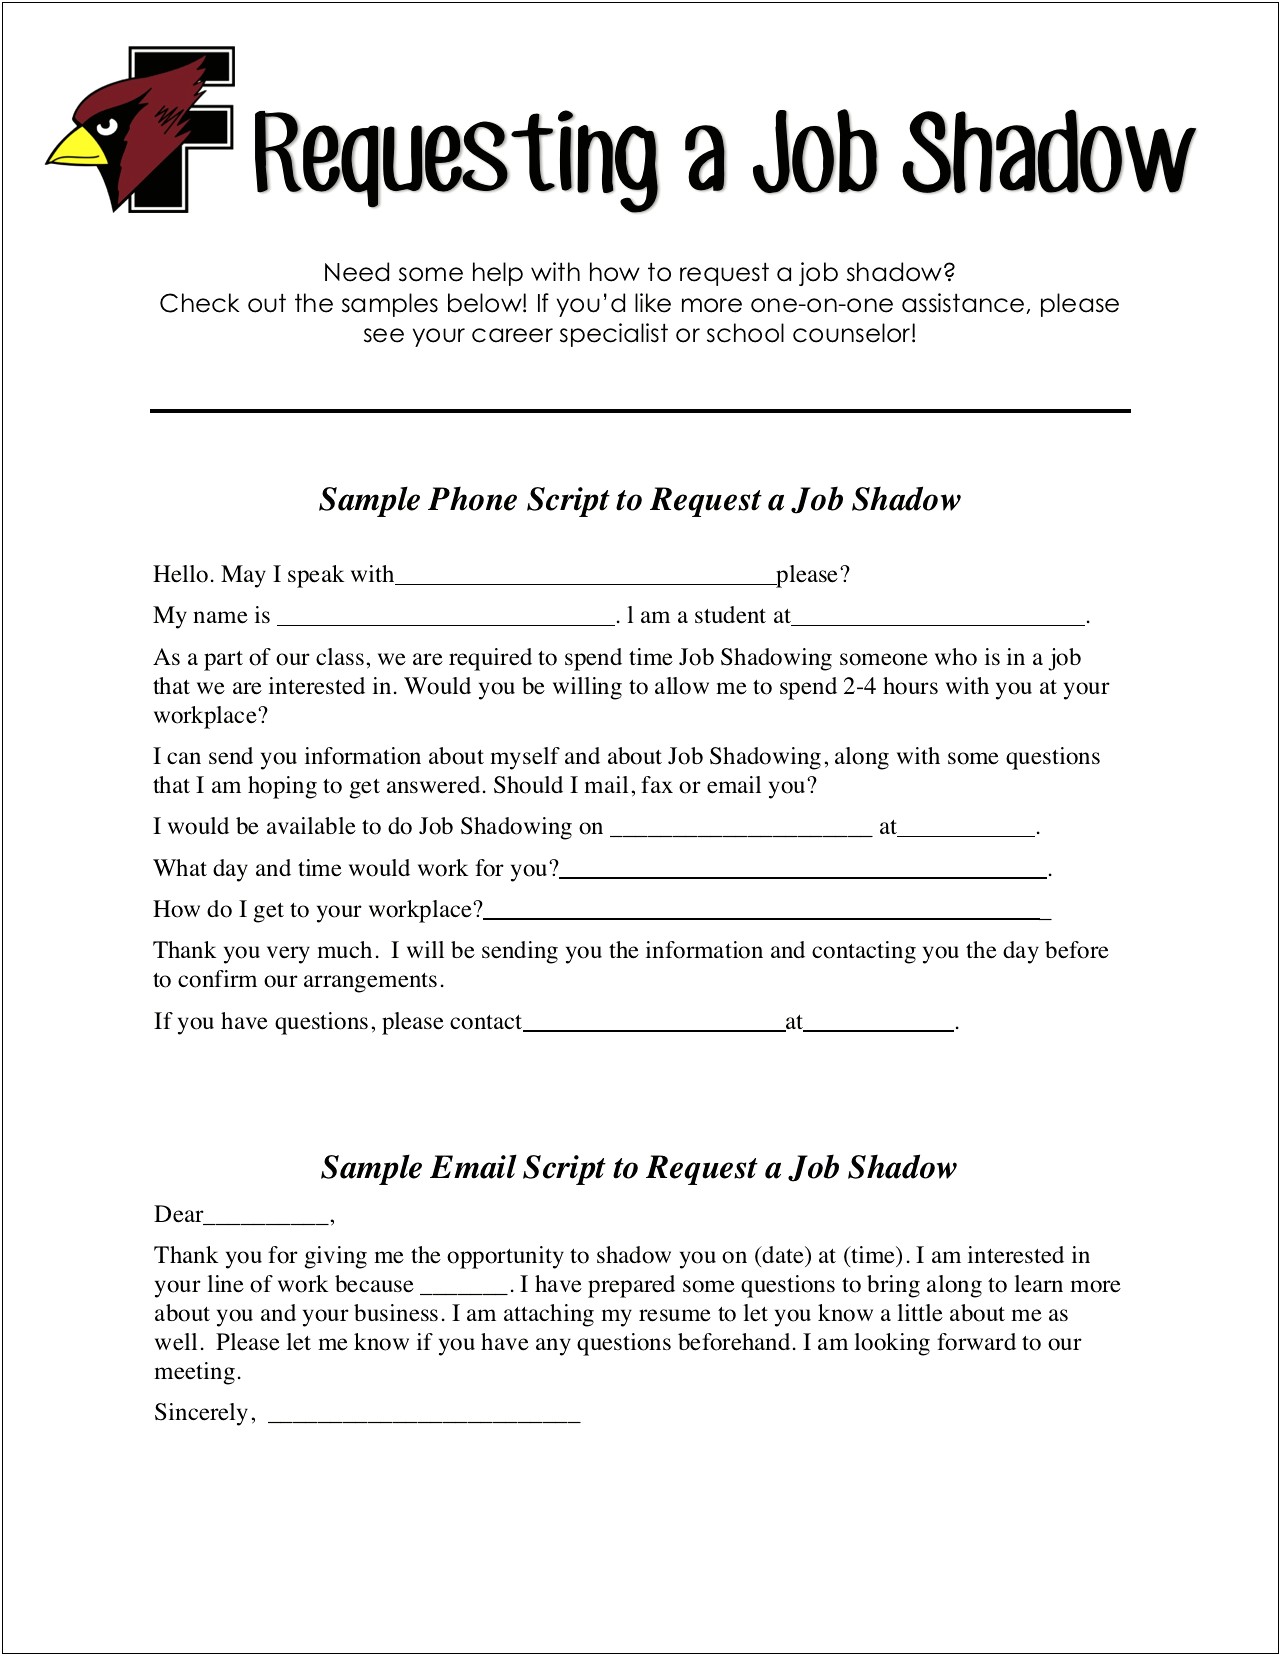 Can You Put Job Shadowing On Your Resume